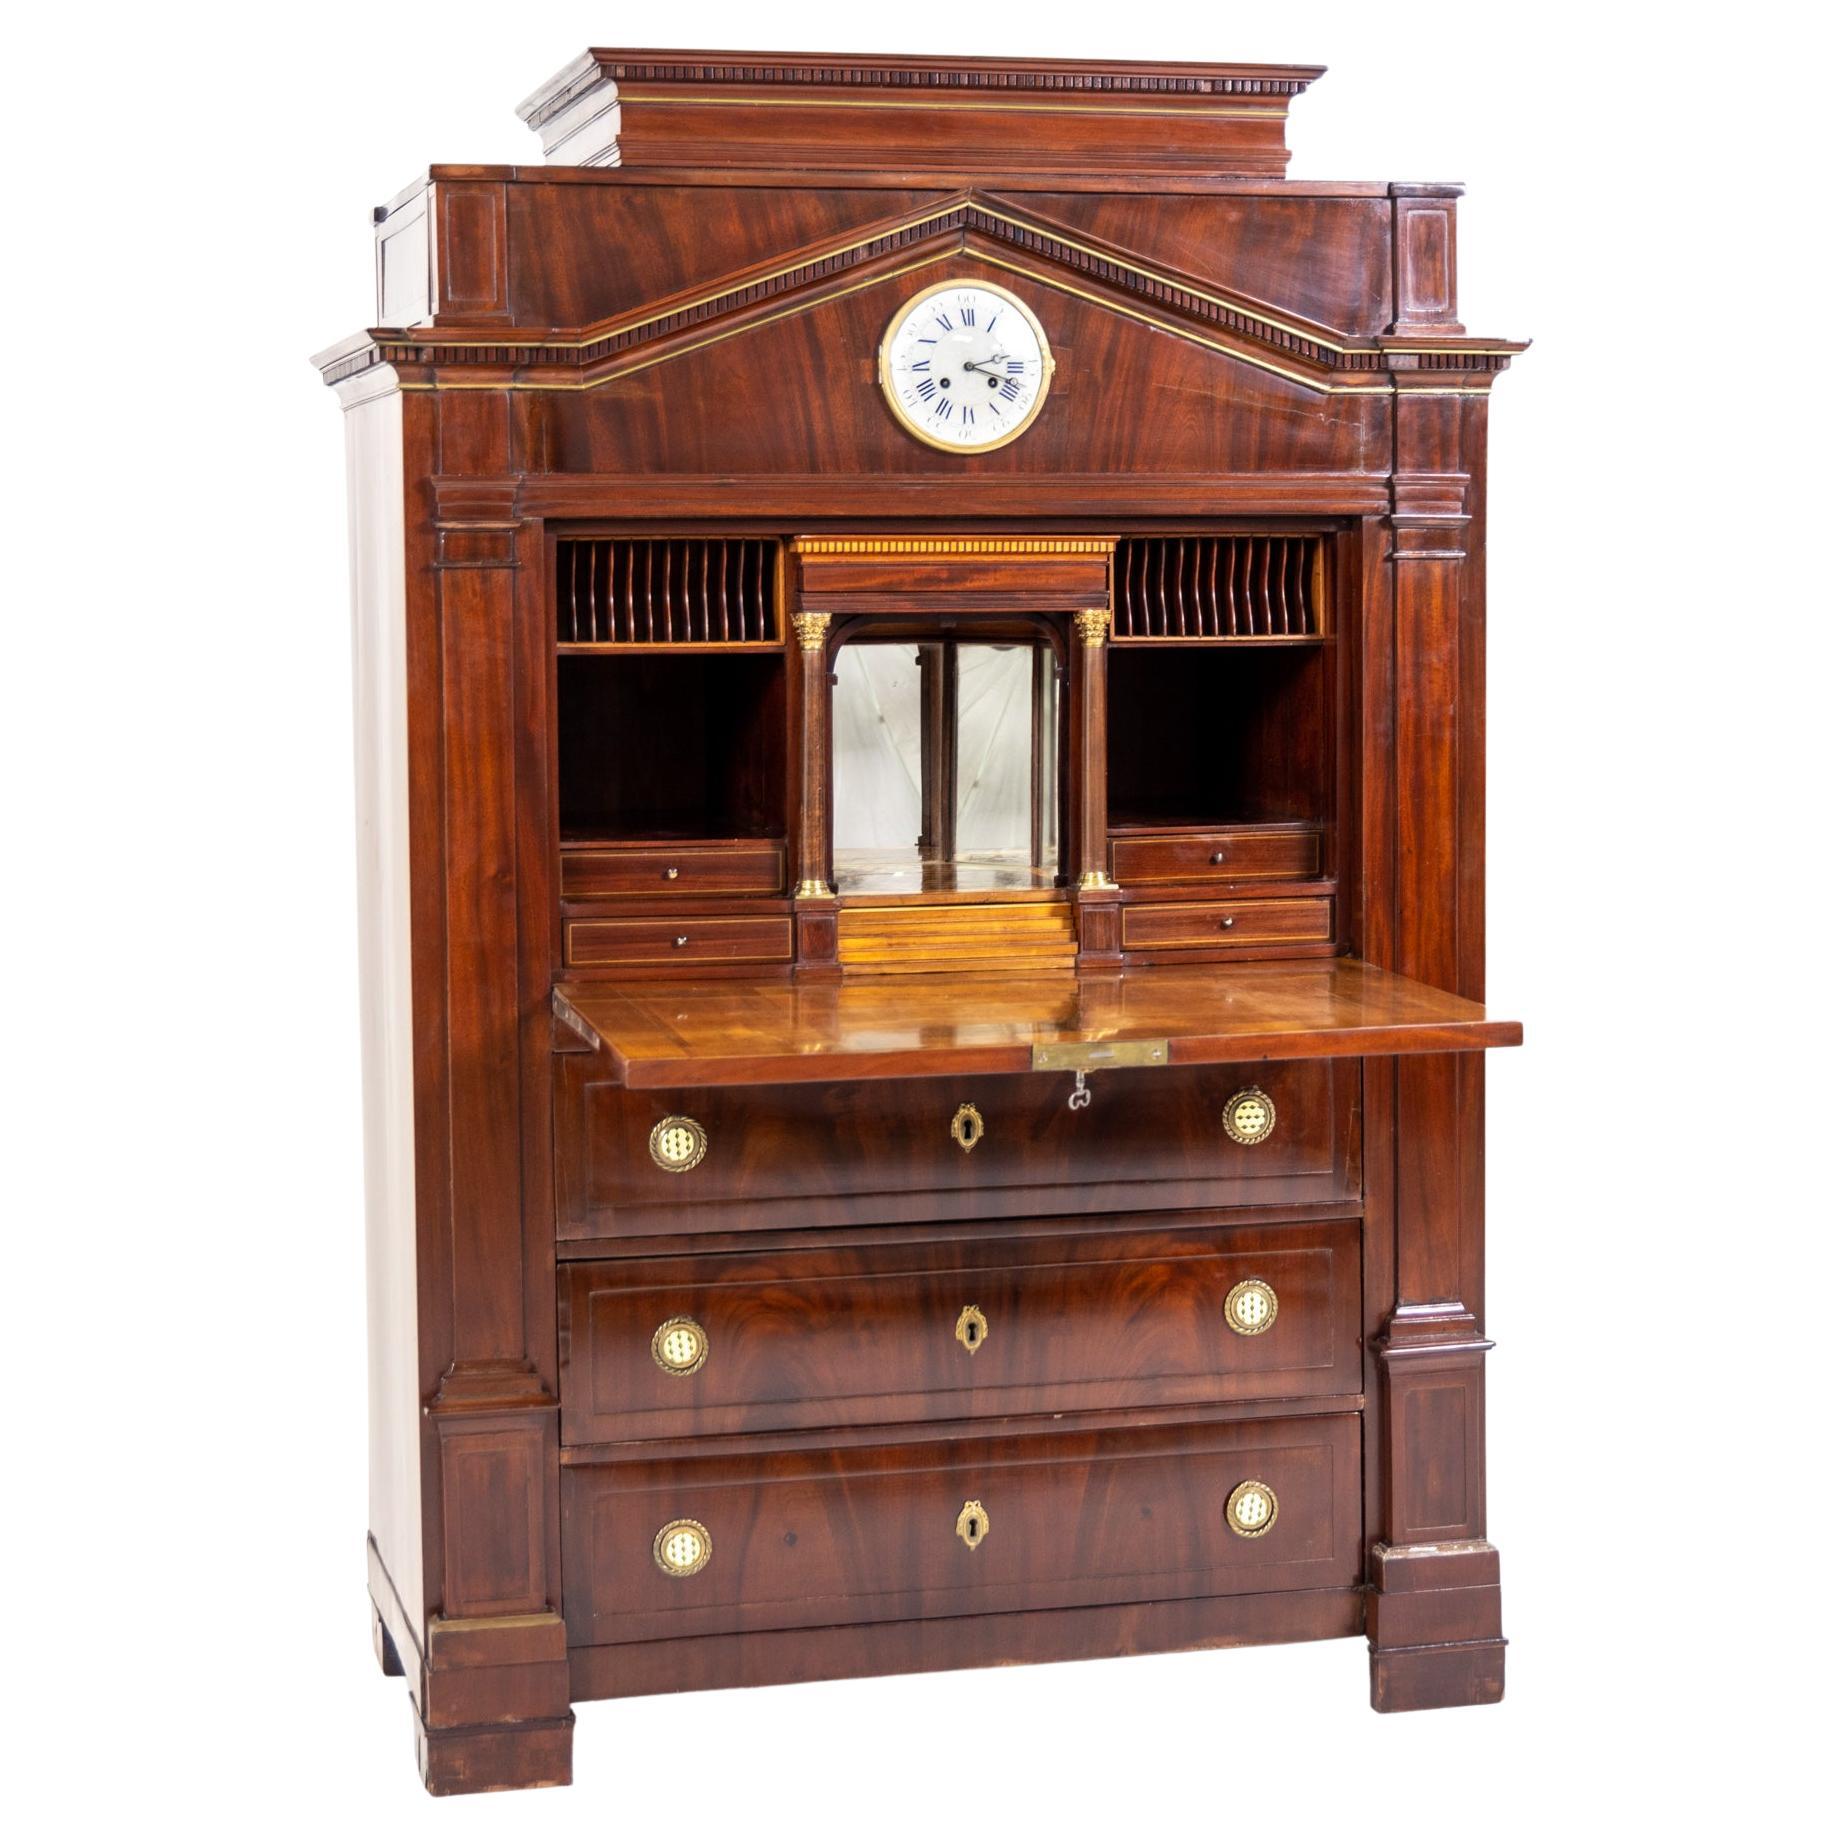 Neoclassiacal Mahogany Secretaire with Clock, Probably Berlin around 1800 For Sale